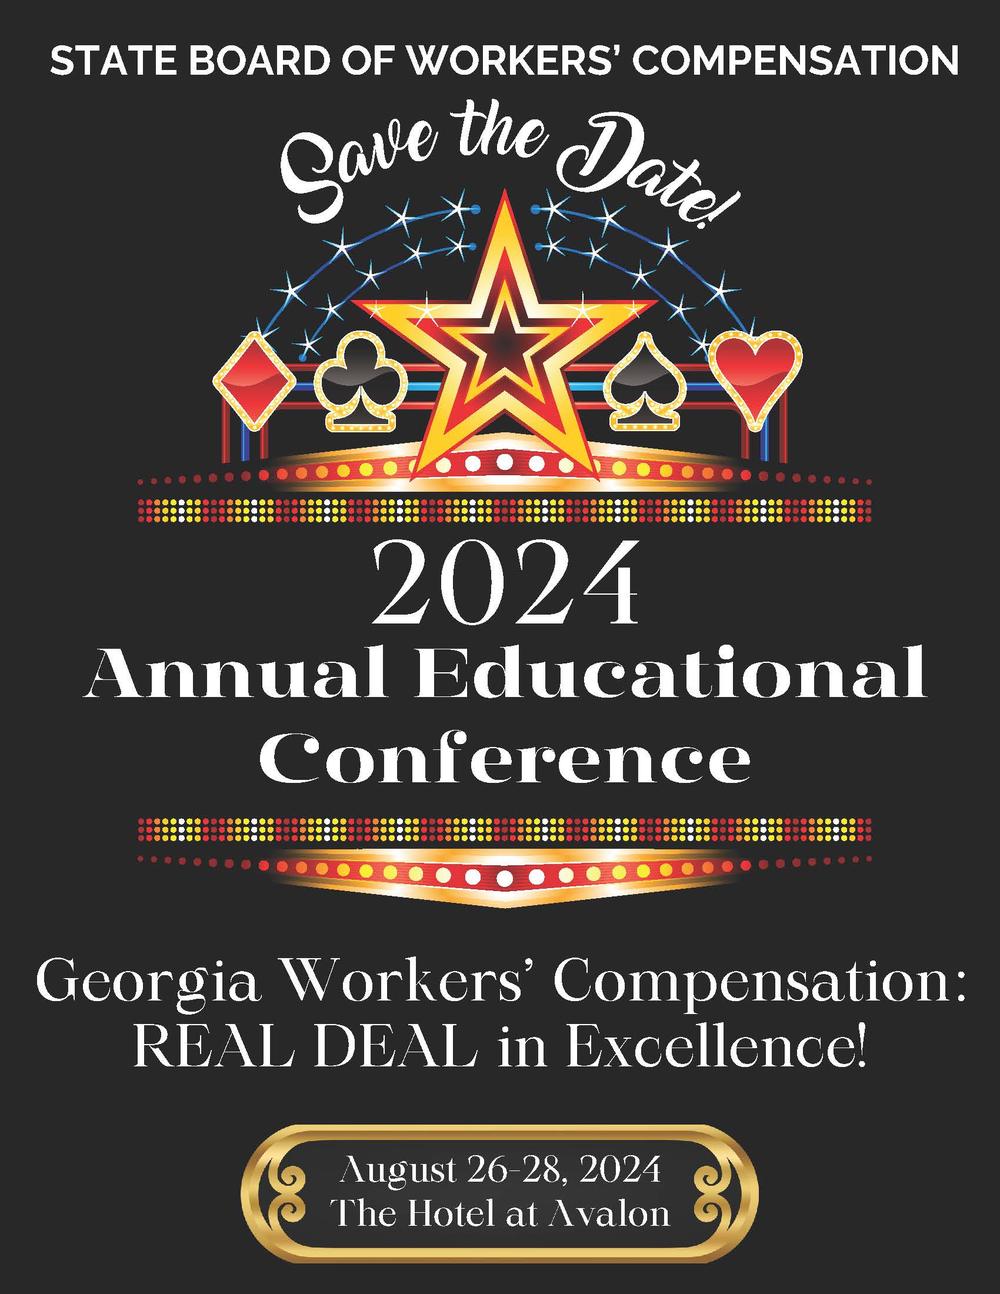 Save the Date - 2024 Annual Educational Conference